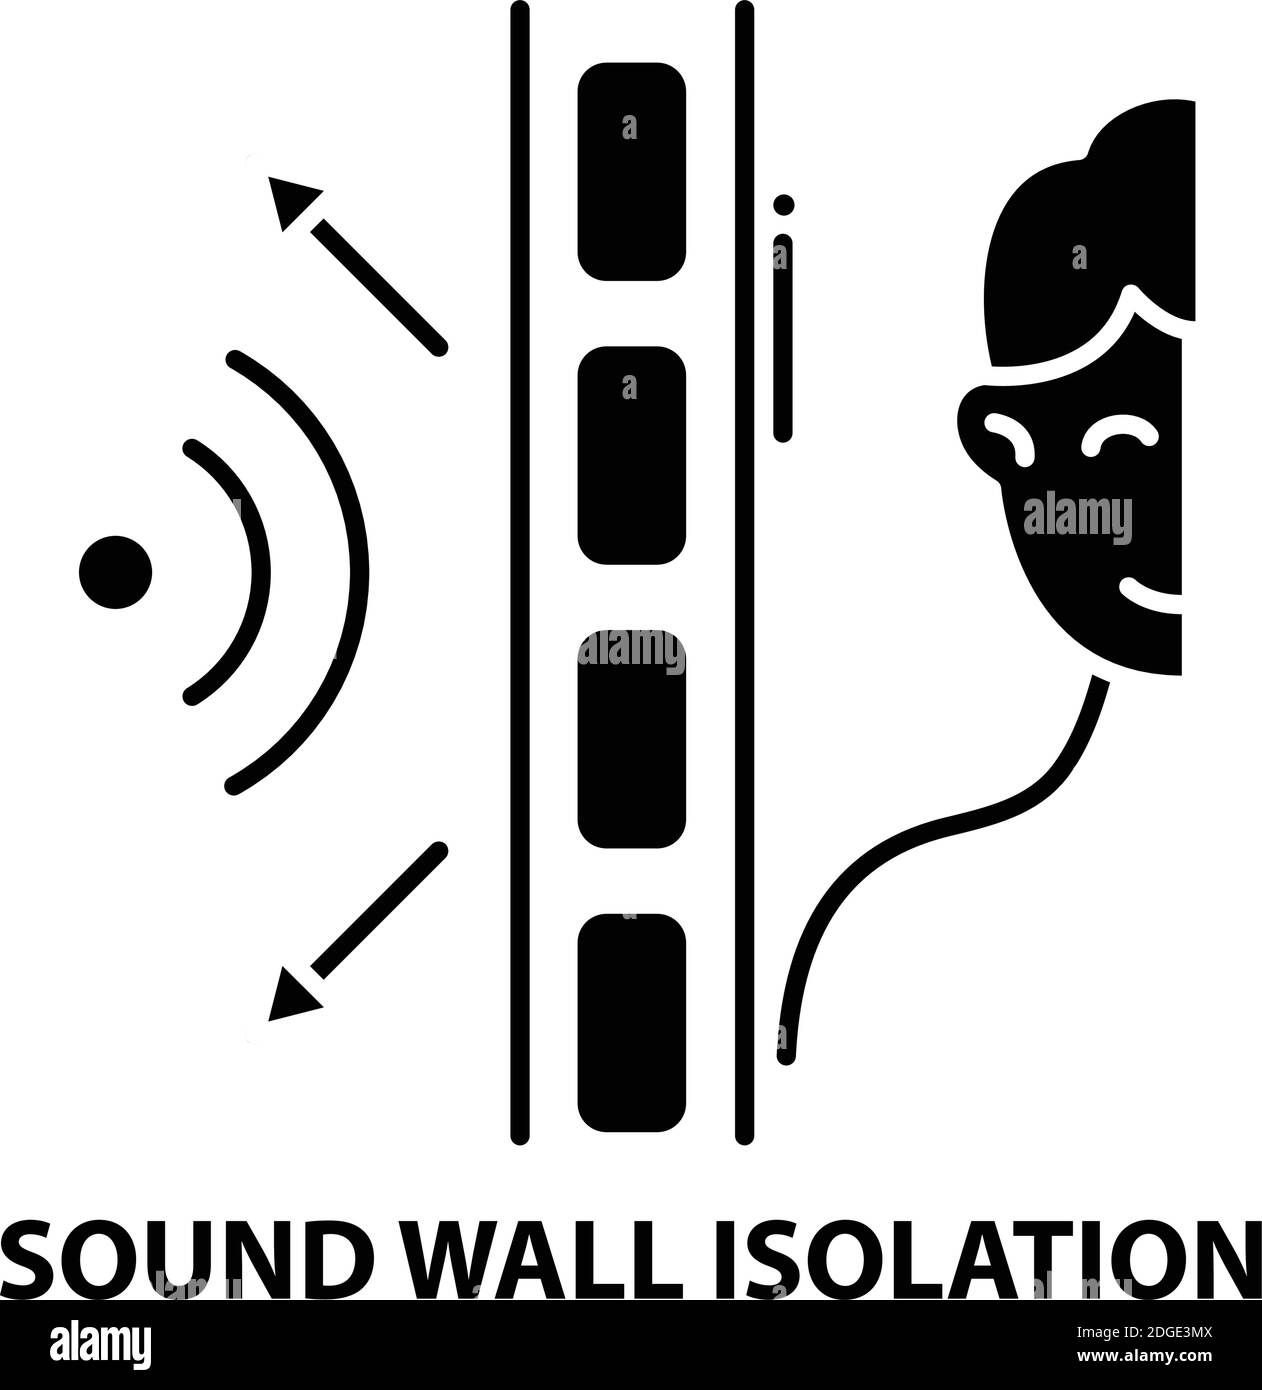 sound wall isolation icon, black vector sign with editable strokes, concept illustration Stock Vector